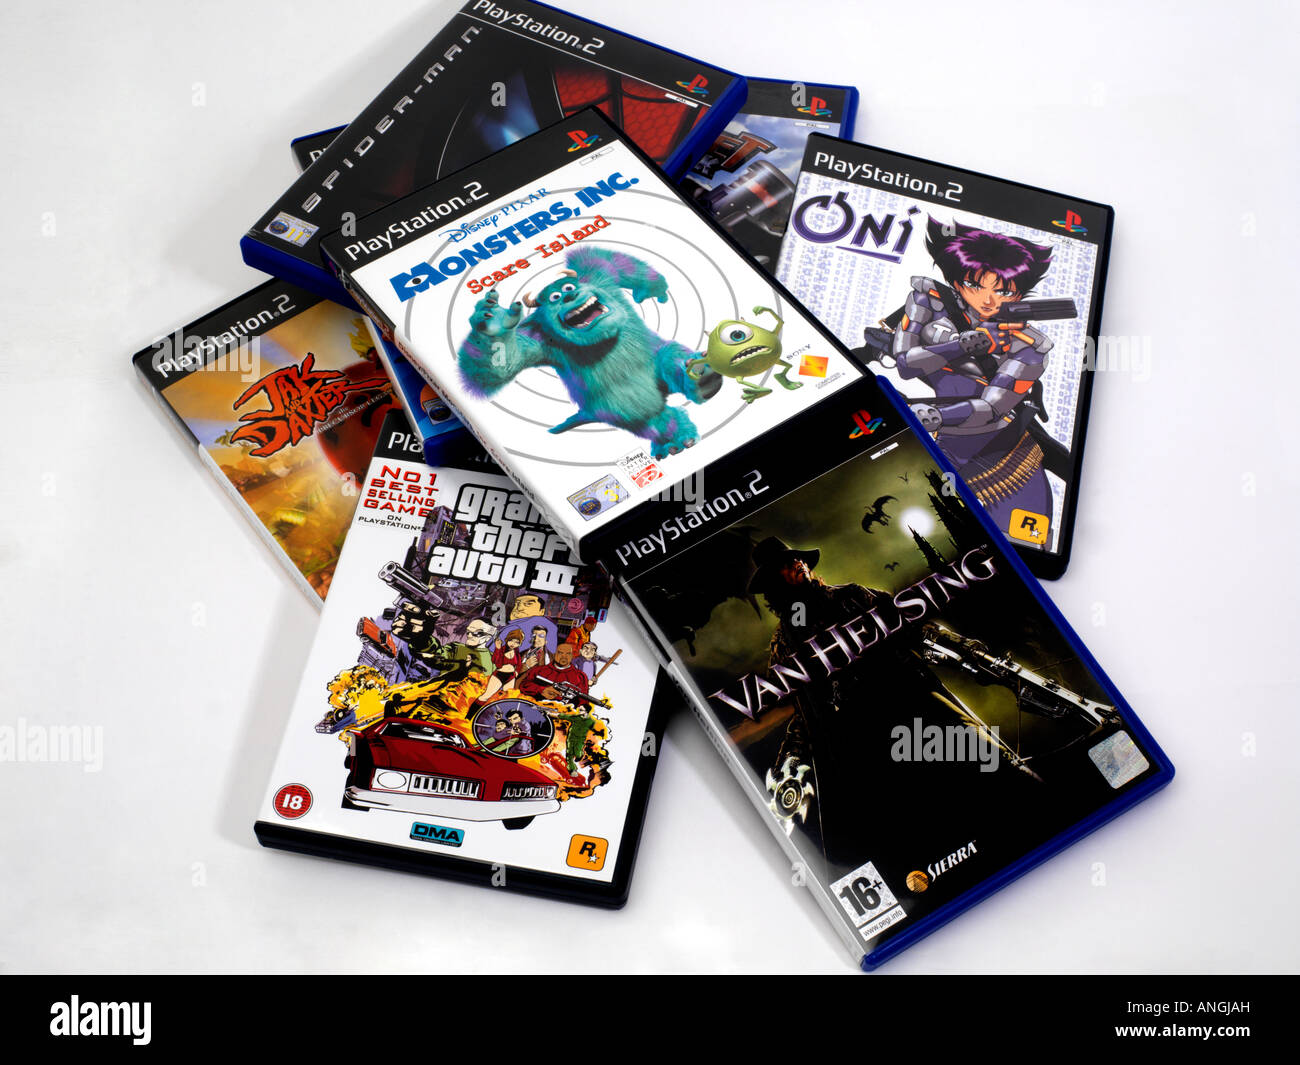 Playstation Games High Resolution Stock Photography and Images - Alamy